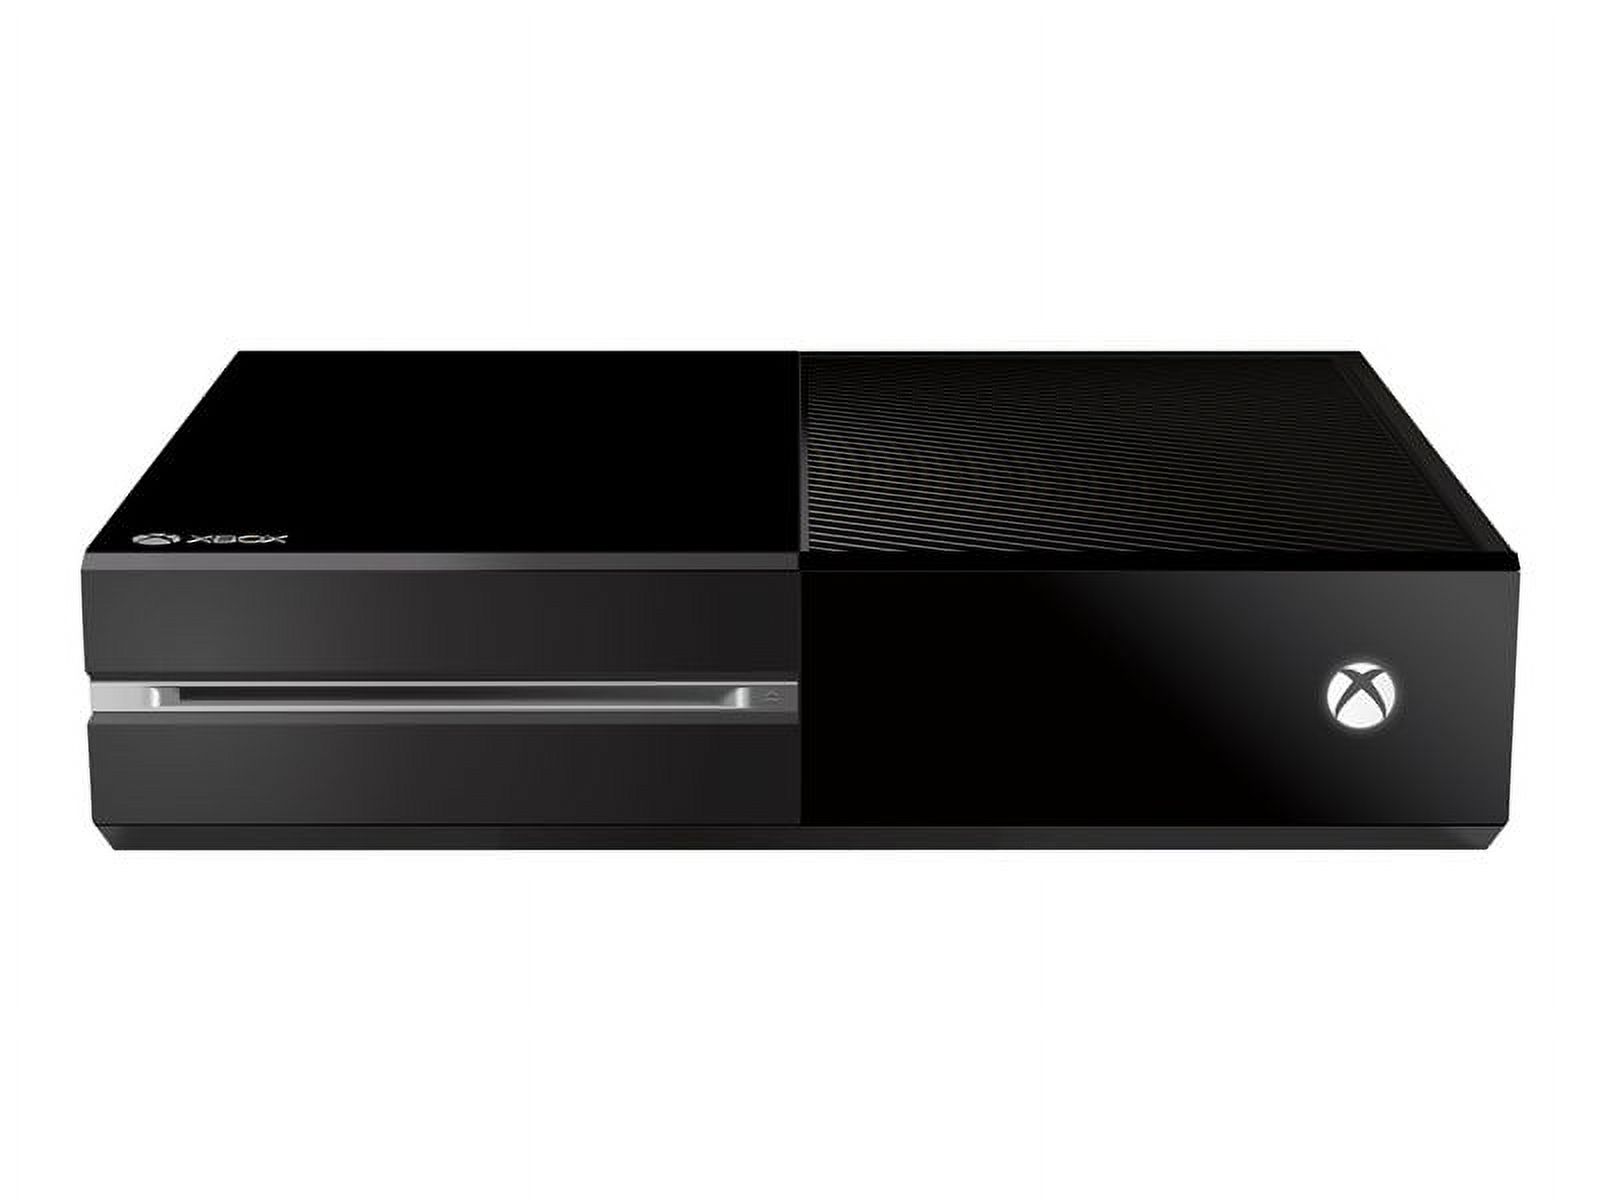 Microsoft Xbox One 500GB Console with Kinect, Black, 7UV-00015 - image 2 of 8